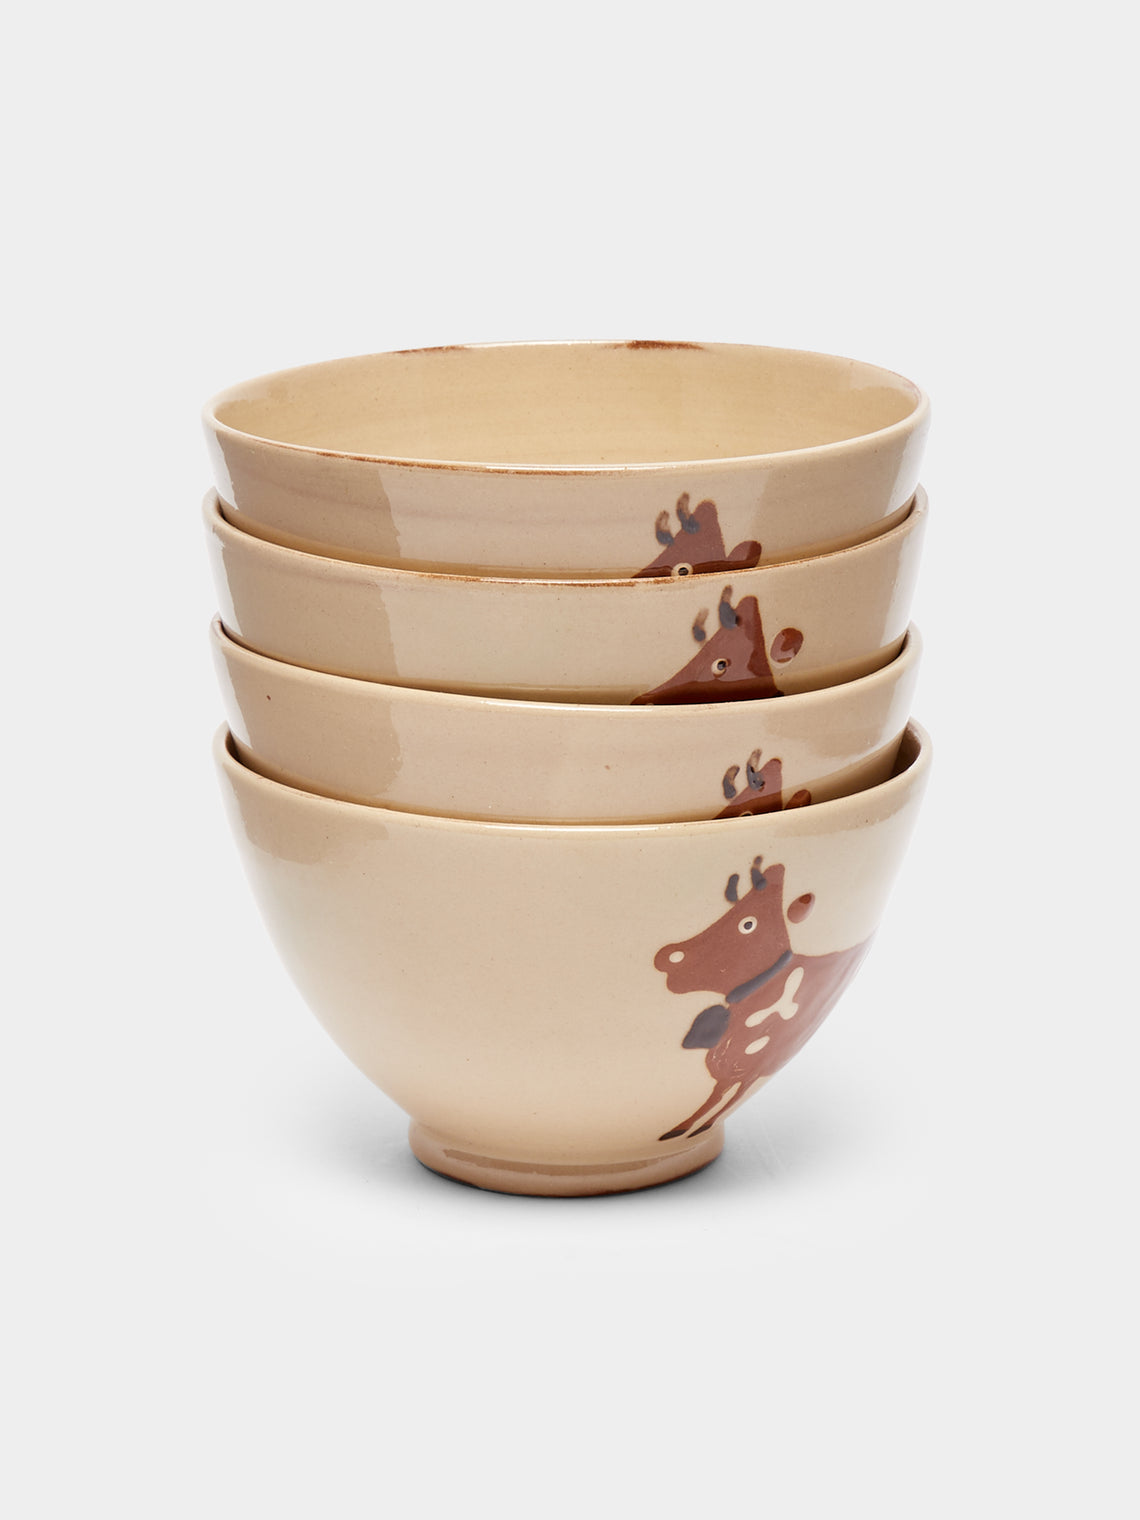 Poterie d’Évires - Cows Hand-Painted Ceramic Cereal Bowls (Set of 4) -  - ABASK